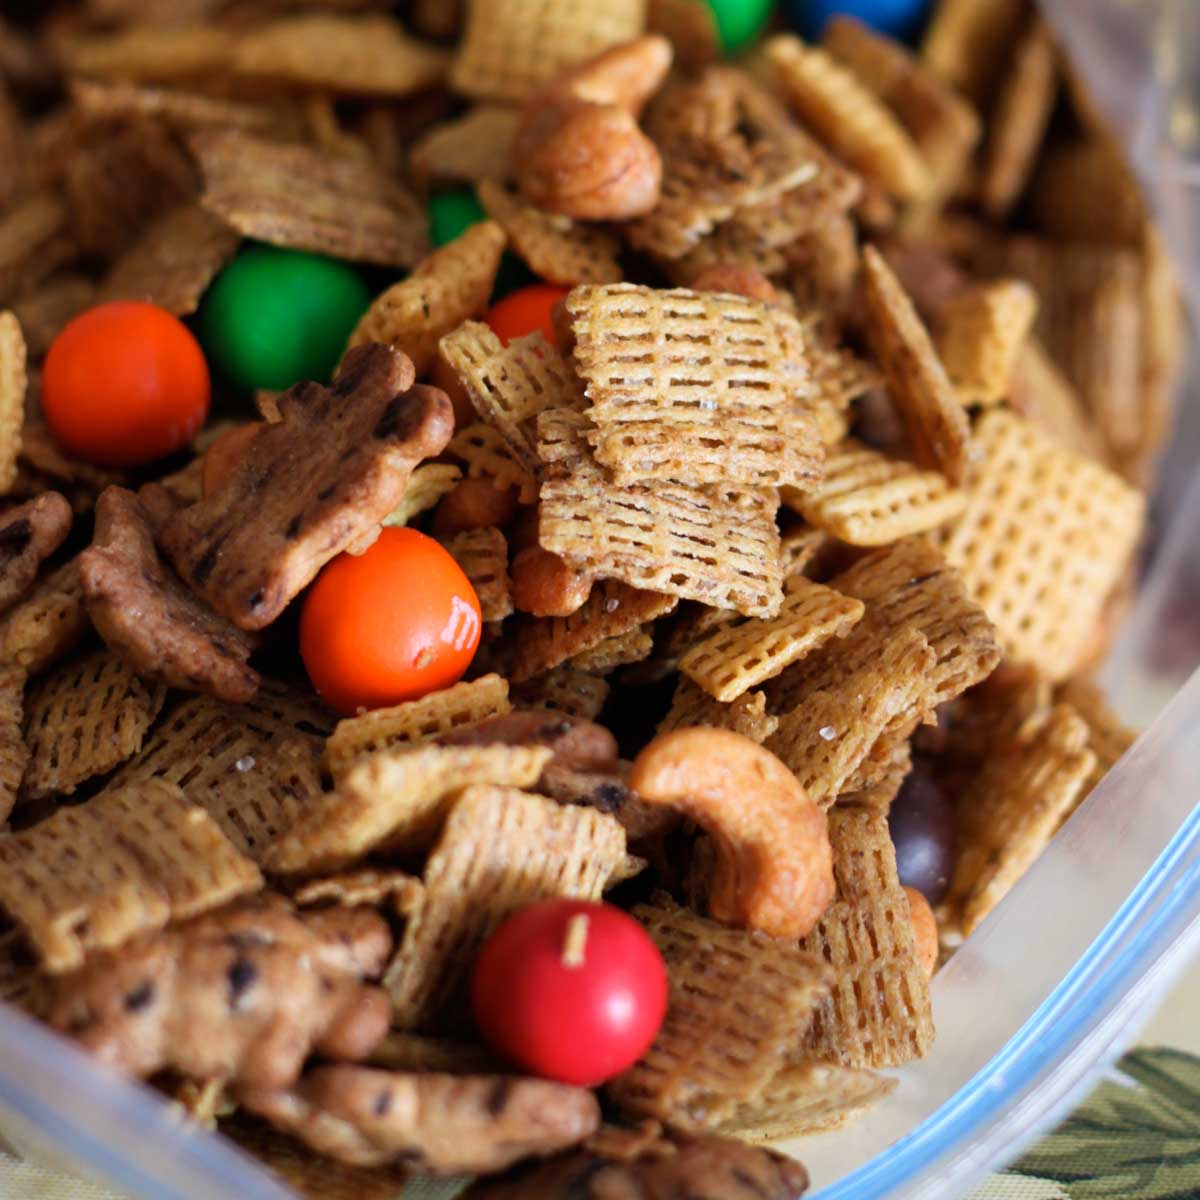 A bag of sweet Chex Mix has nuts, cereal, and red and orange M&M candies.